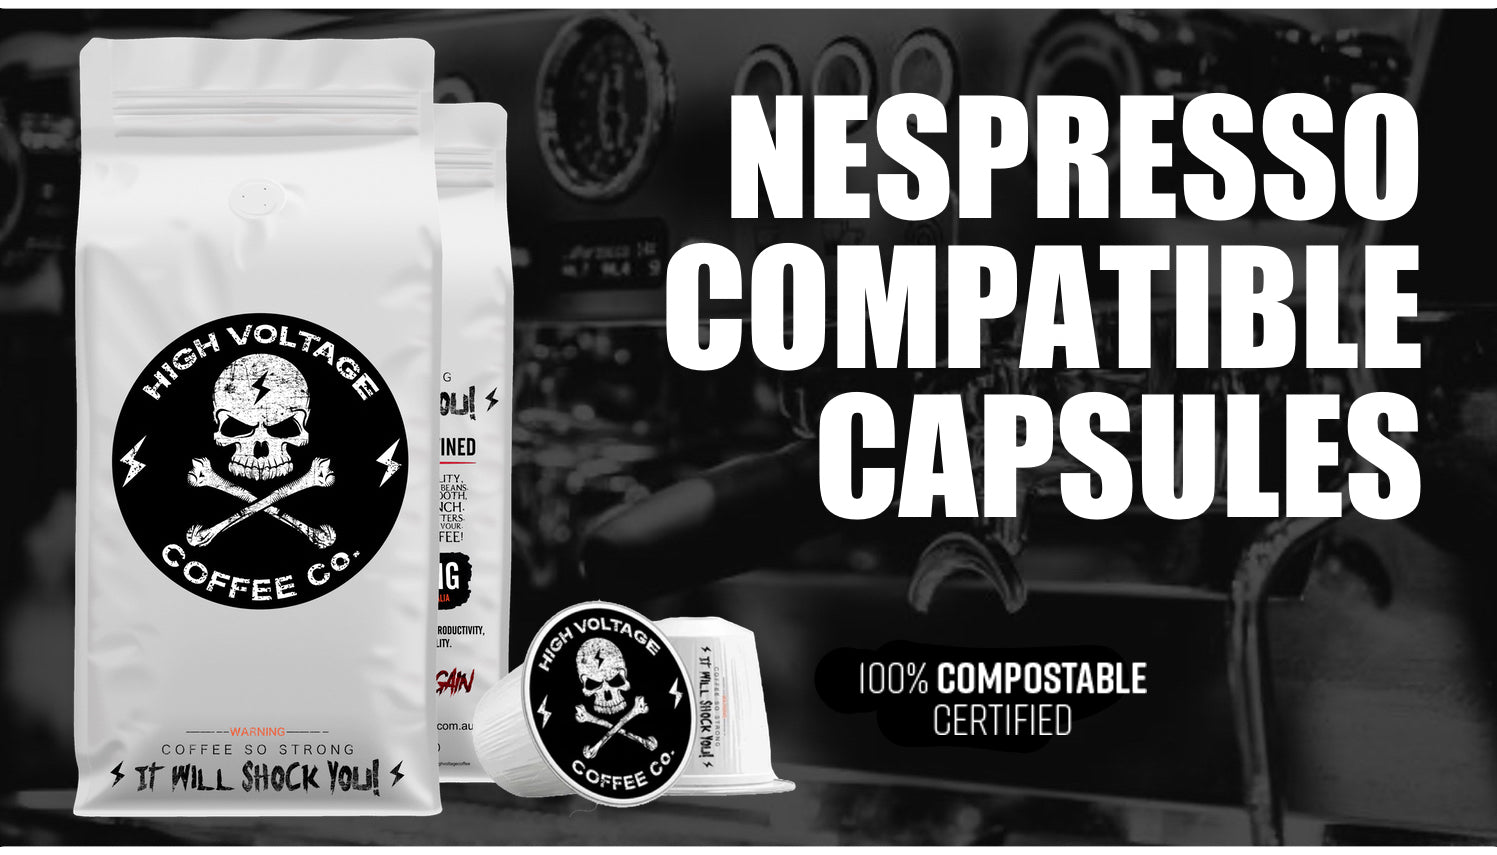 Australia's #1 Strong Coffee ☕ Delivered Fast & Fresh to your doorstep. FREE Shipping on orders $75 and over. Australian Nespresso compatible coffee capsules with High Voltage Coffee Co. 100% compostable certification. strongest nespresso coffee capsules pods.